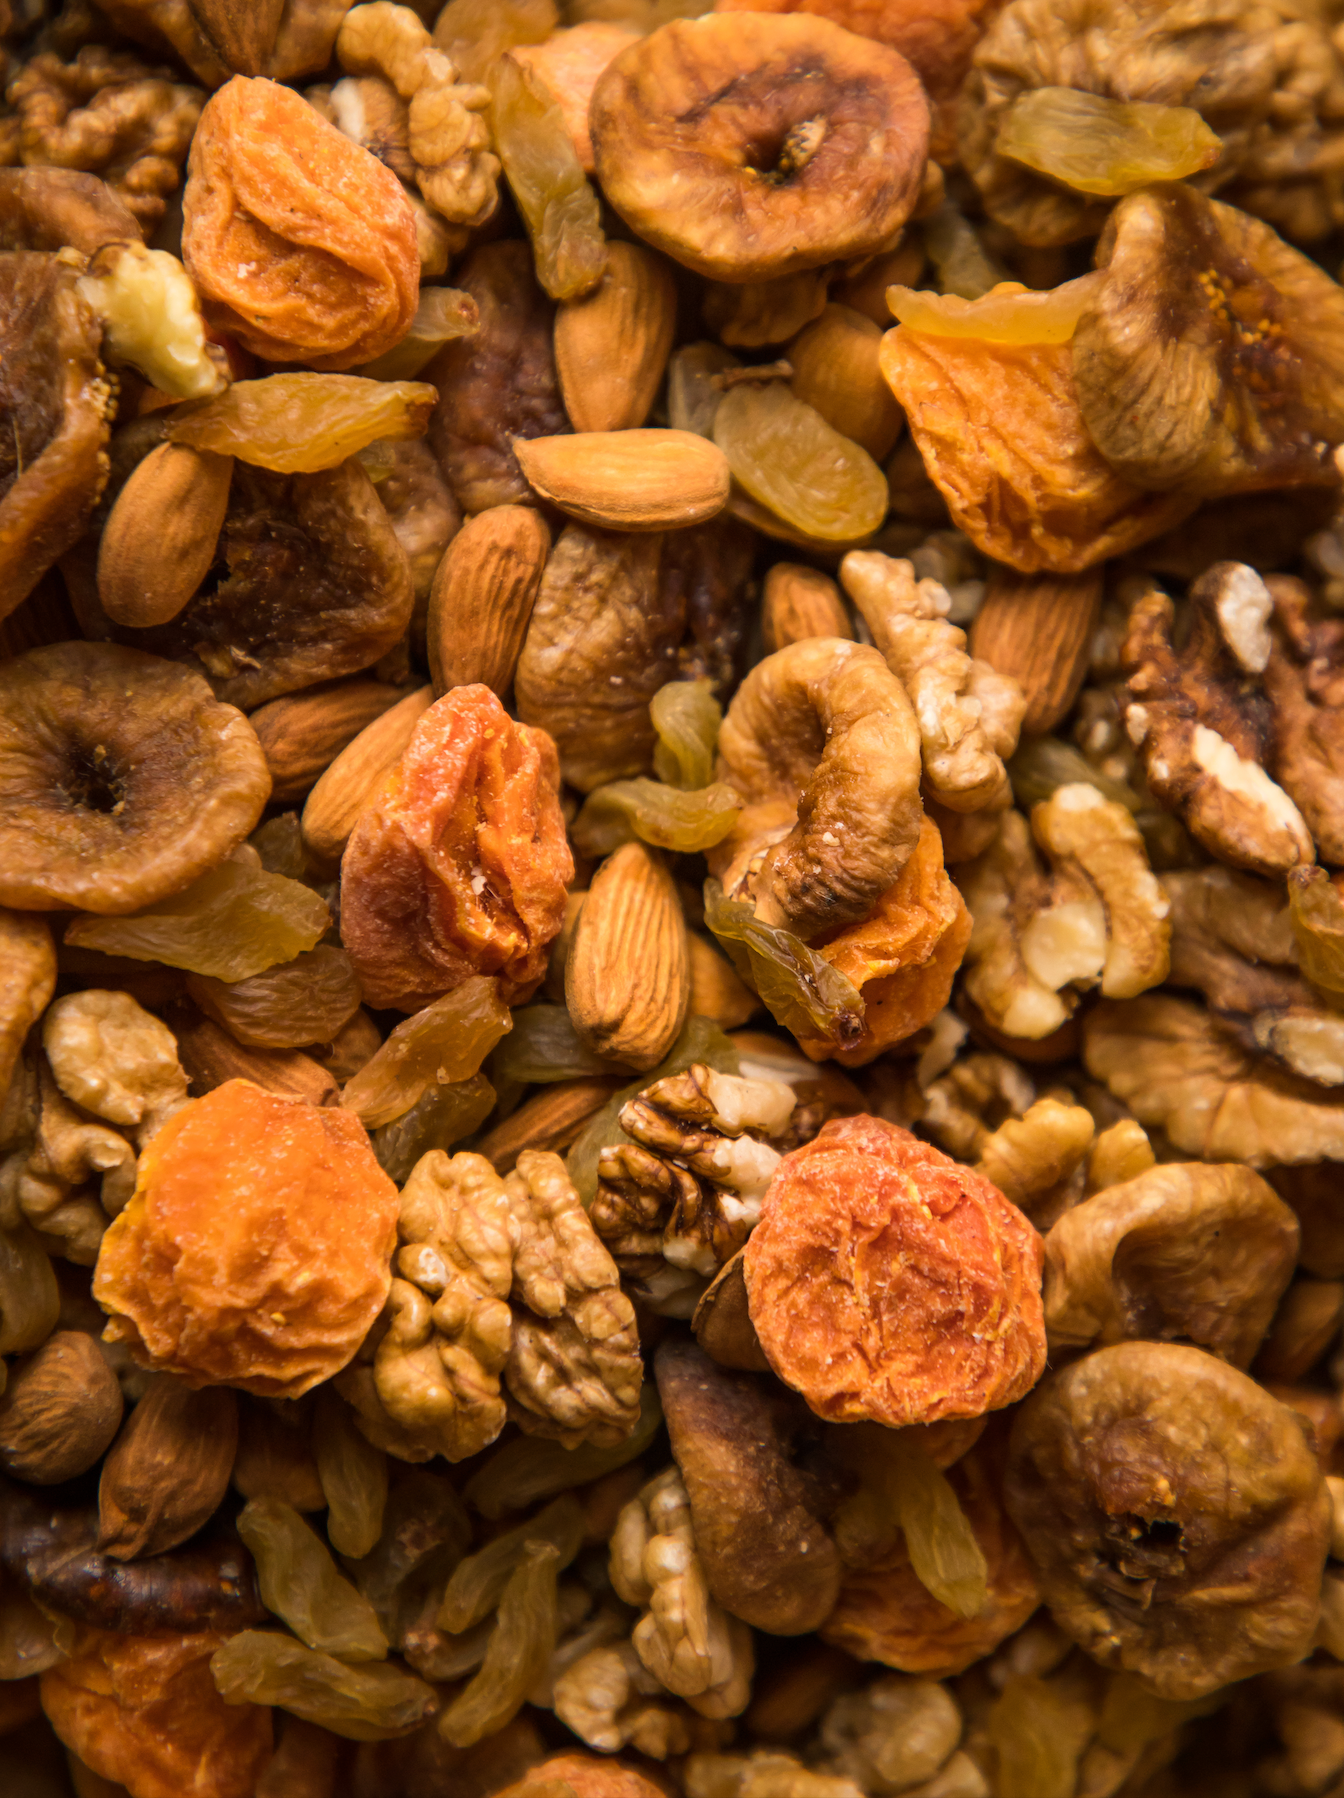 K&M's Mixed Dry Fruits